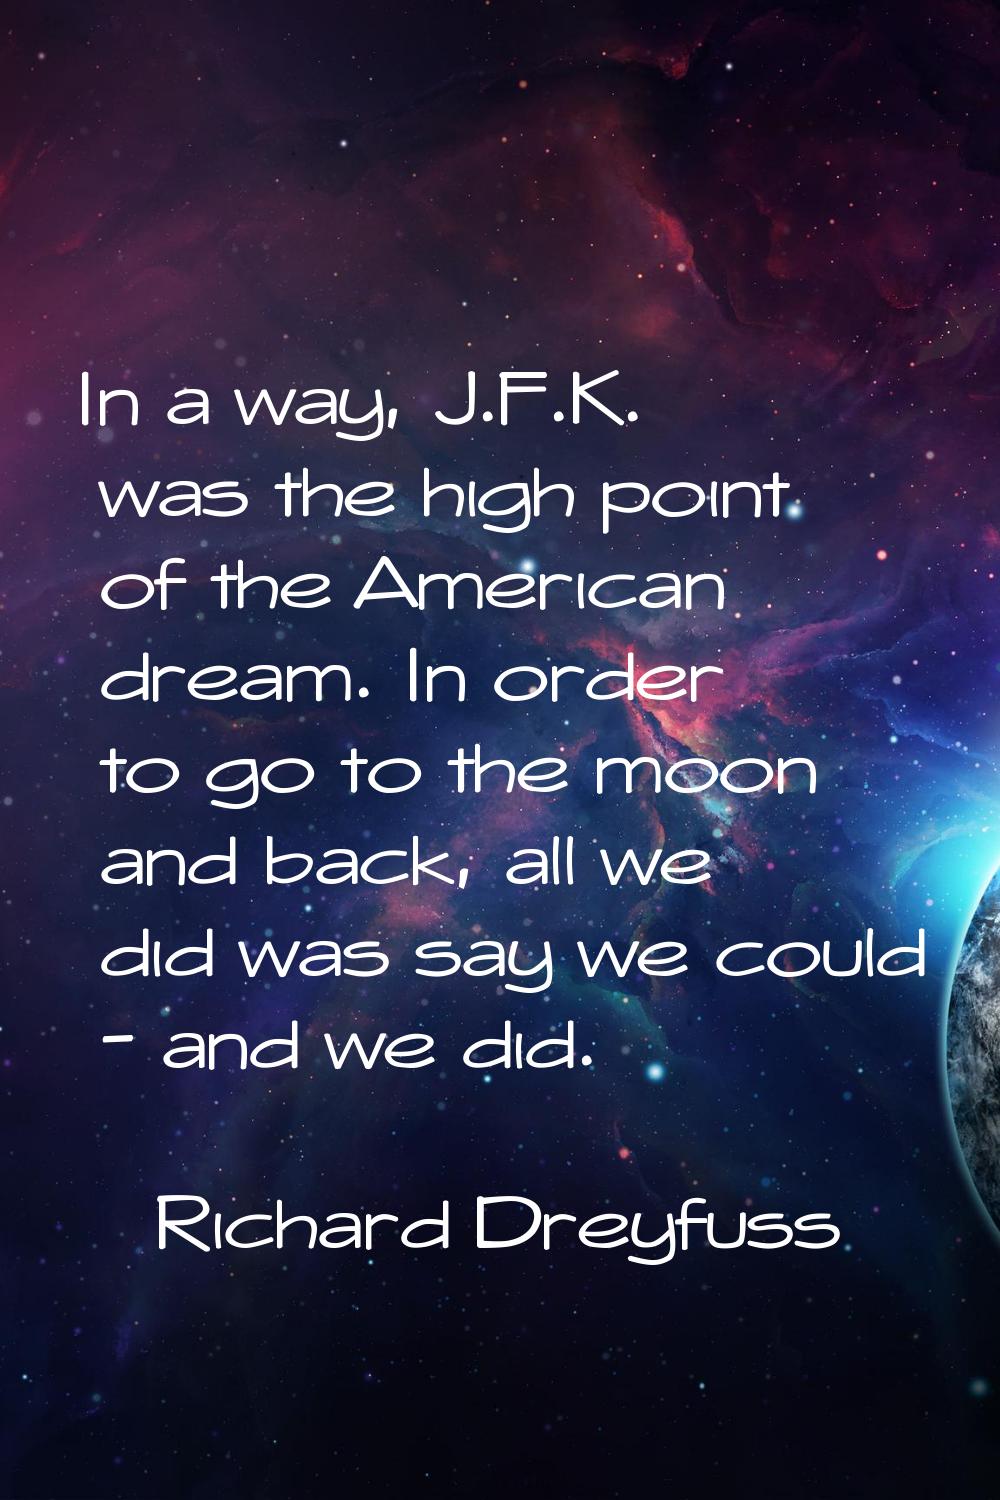 In a way, J.F.K. was the high point of the American dream. In order to go to the moon and back, all